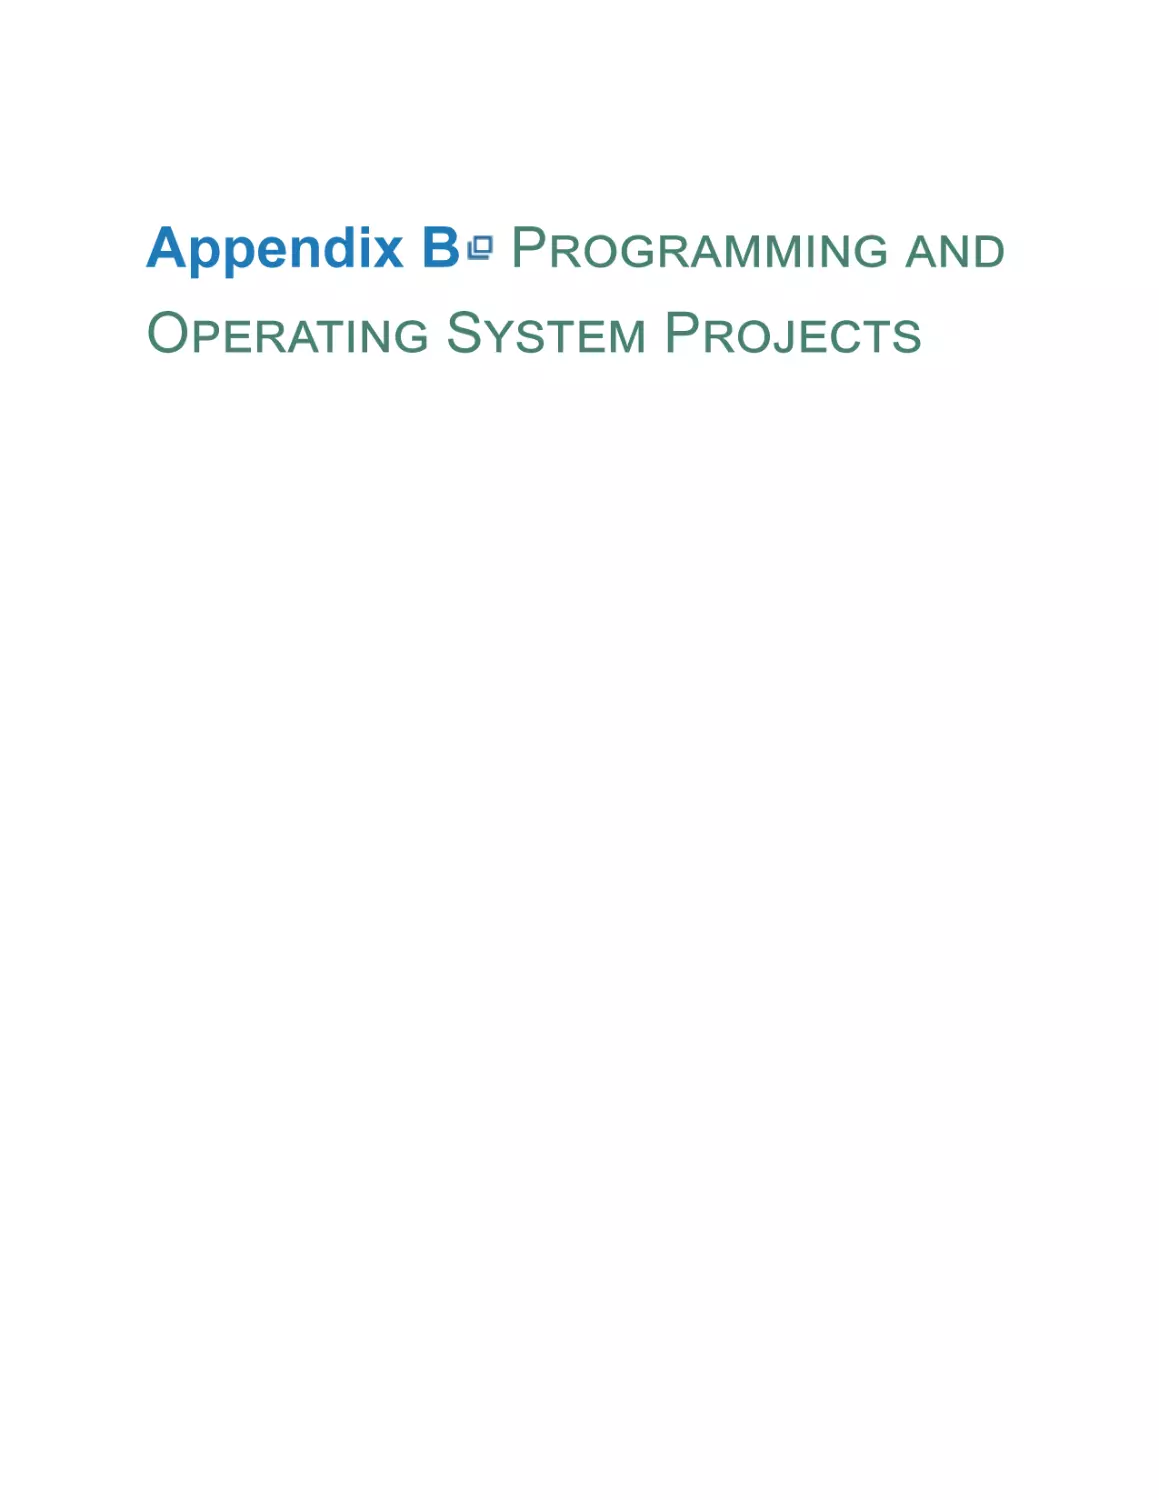 Appendix B Programming and Operating System Projects